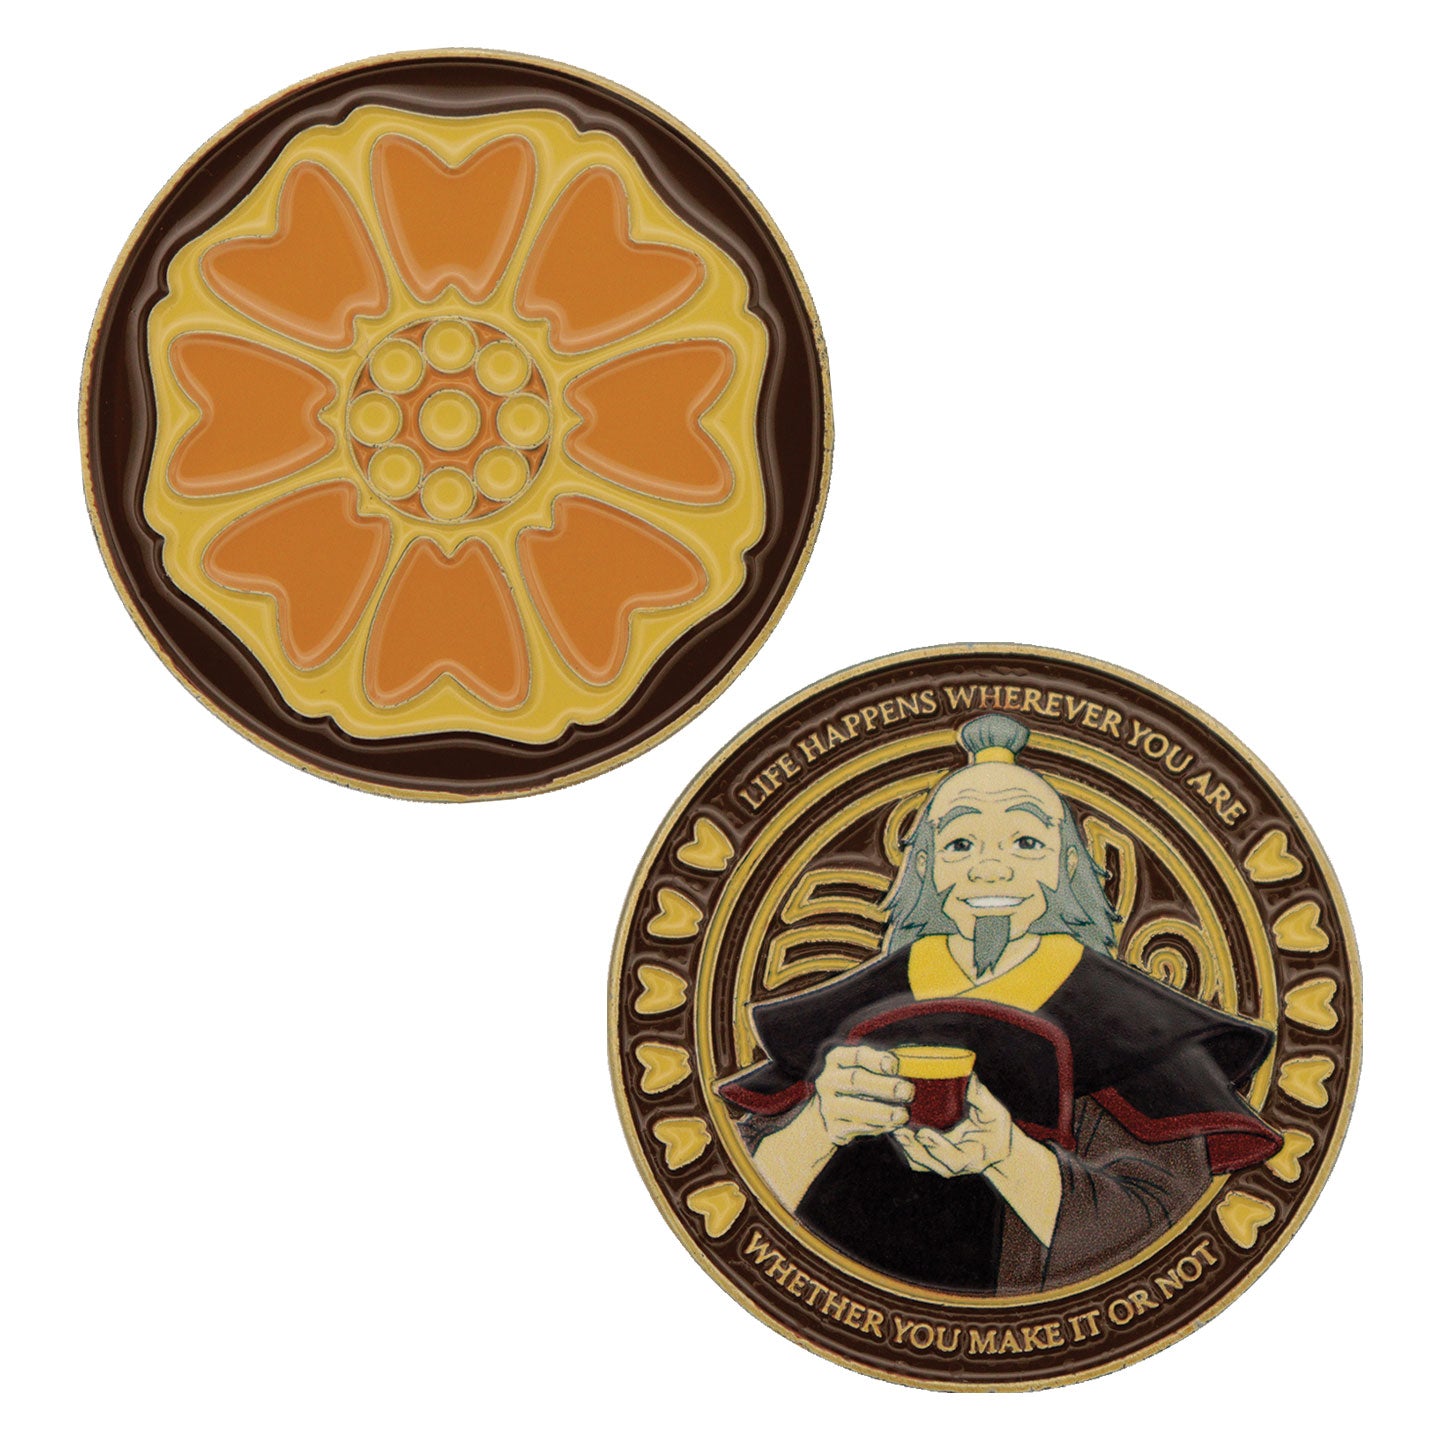 Avatar the Last Airbender Limited Edition Collectible Coin